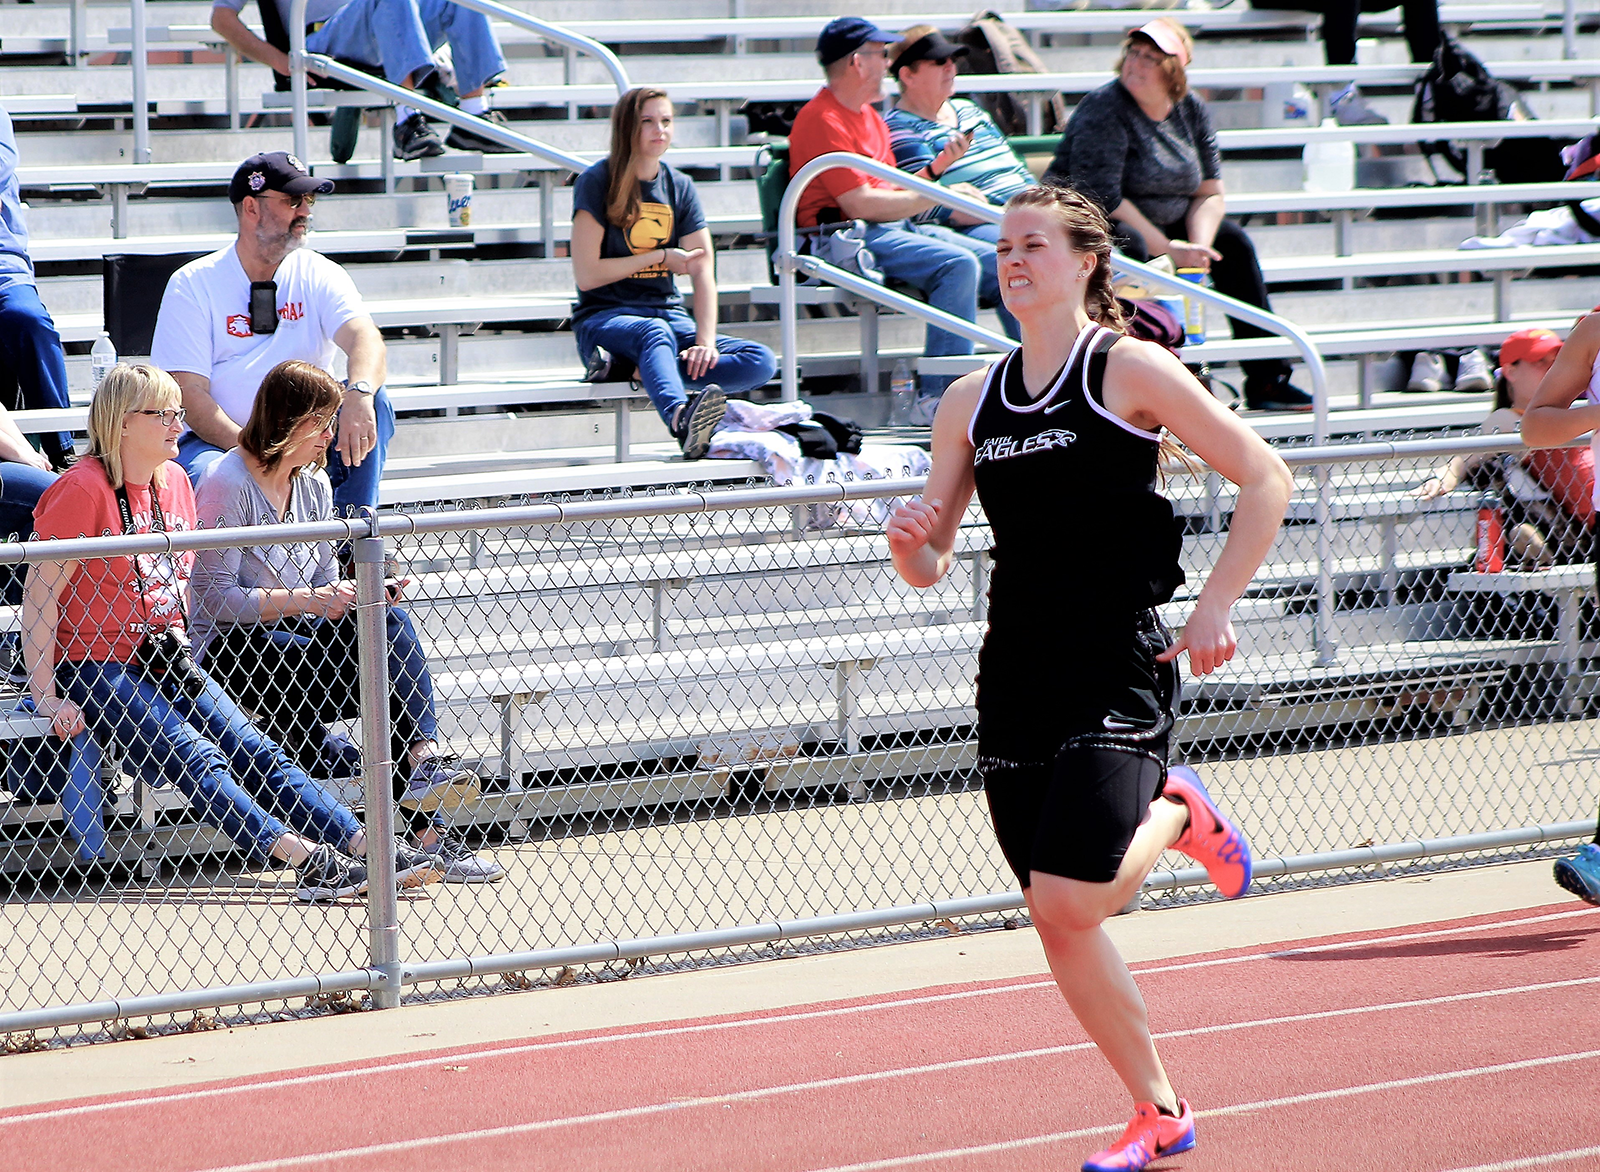 Chelsea Ratliff's time in the 400m is the eighth fastest in the nation in NCCAA competition